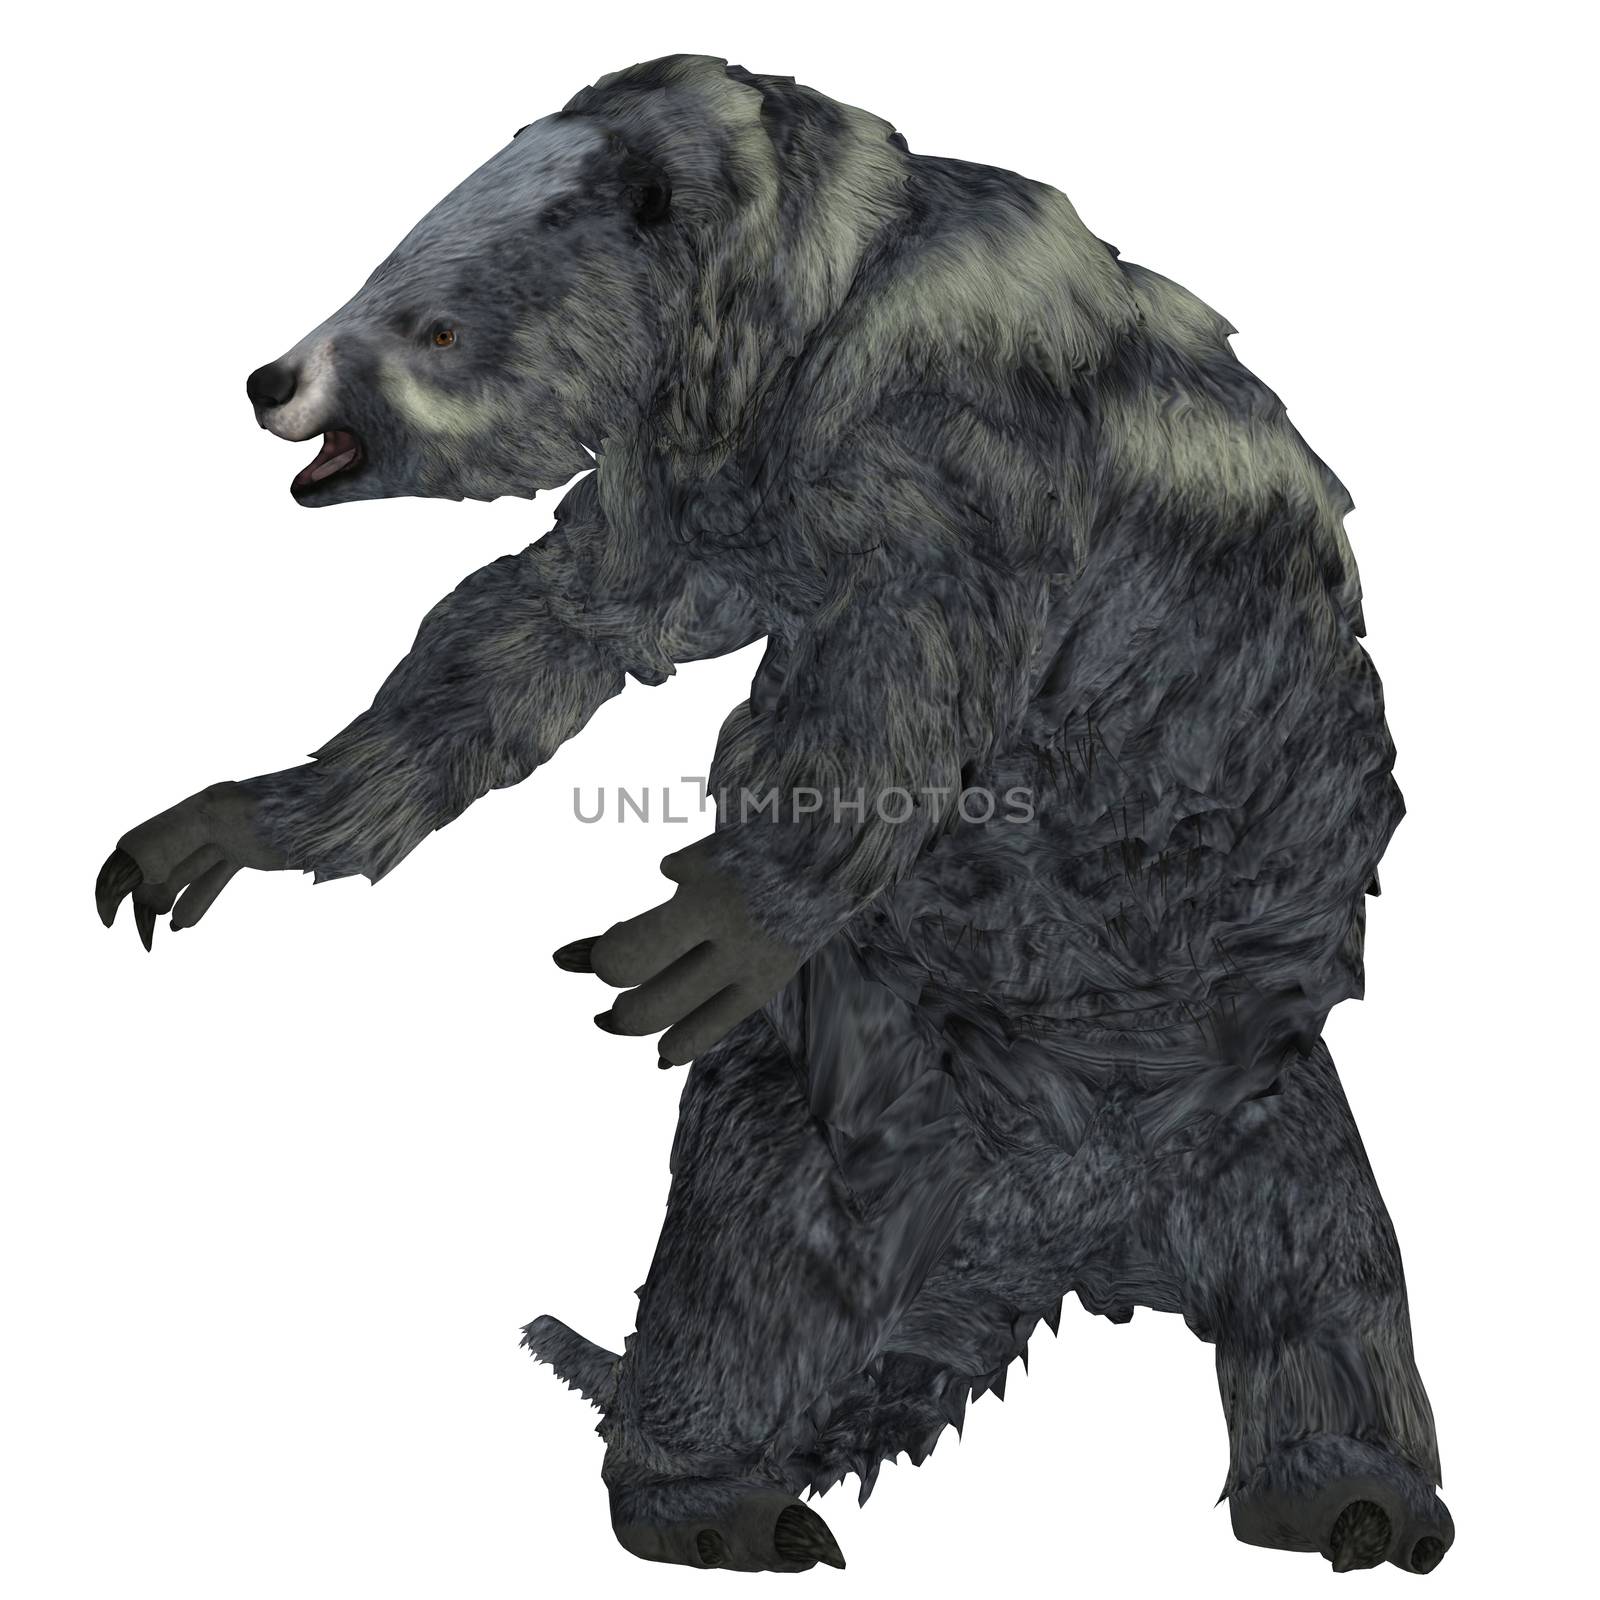 Eremotherium was one of the largest ground sloths that lived in North and South America in the Pleistocene Period.